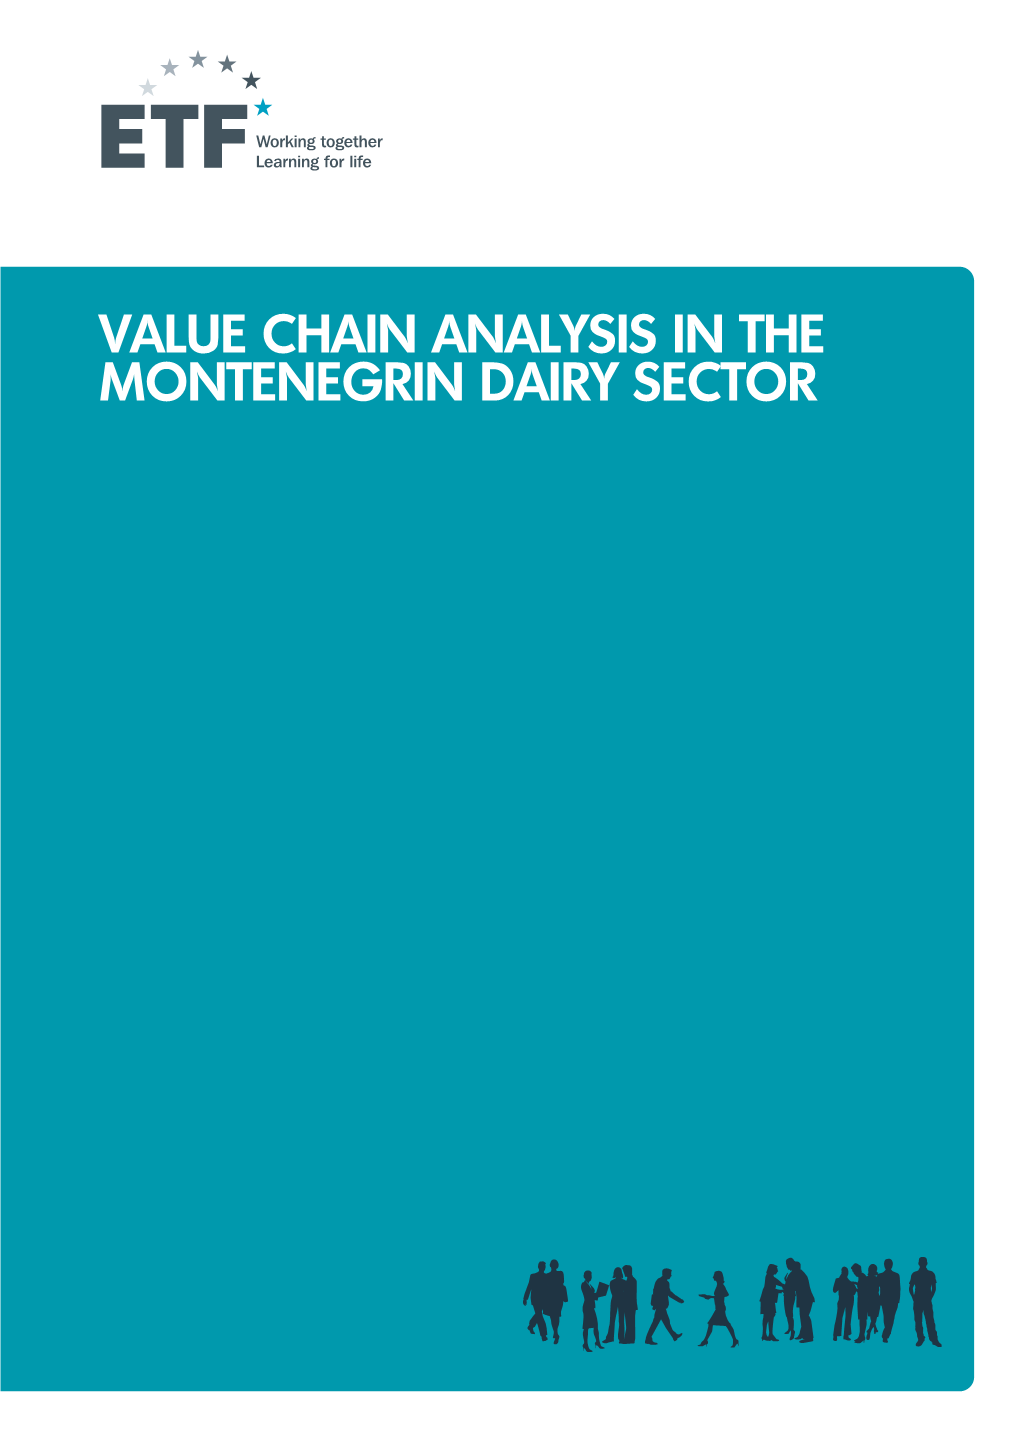 Value Chain Analysis in the Montenegrin Dairy Sector Prepared for the Etf by Prof